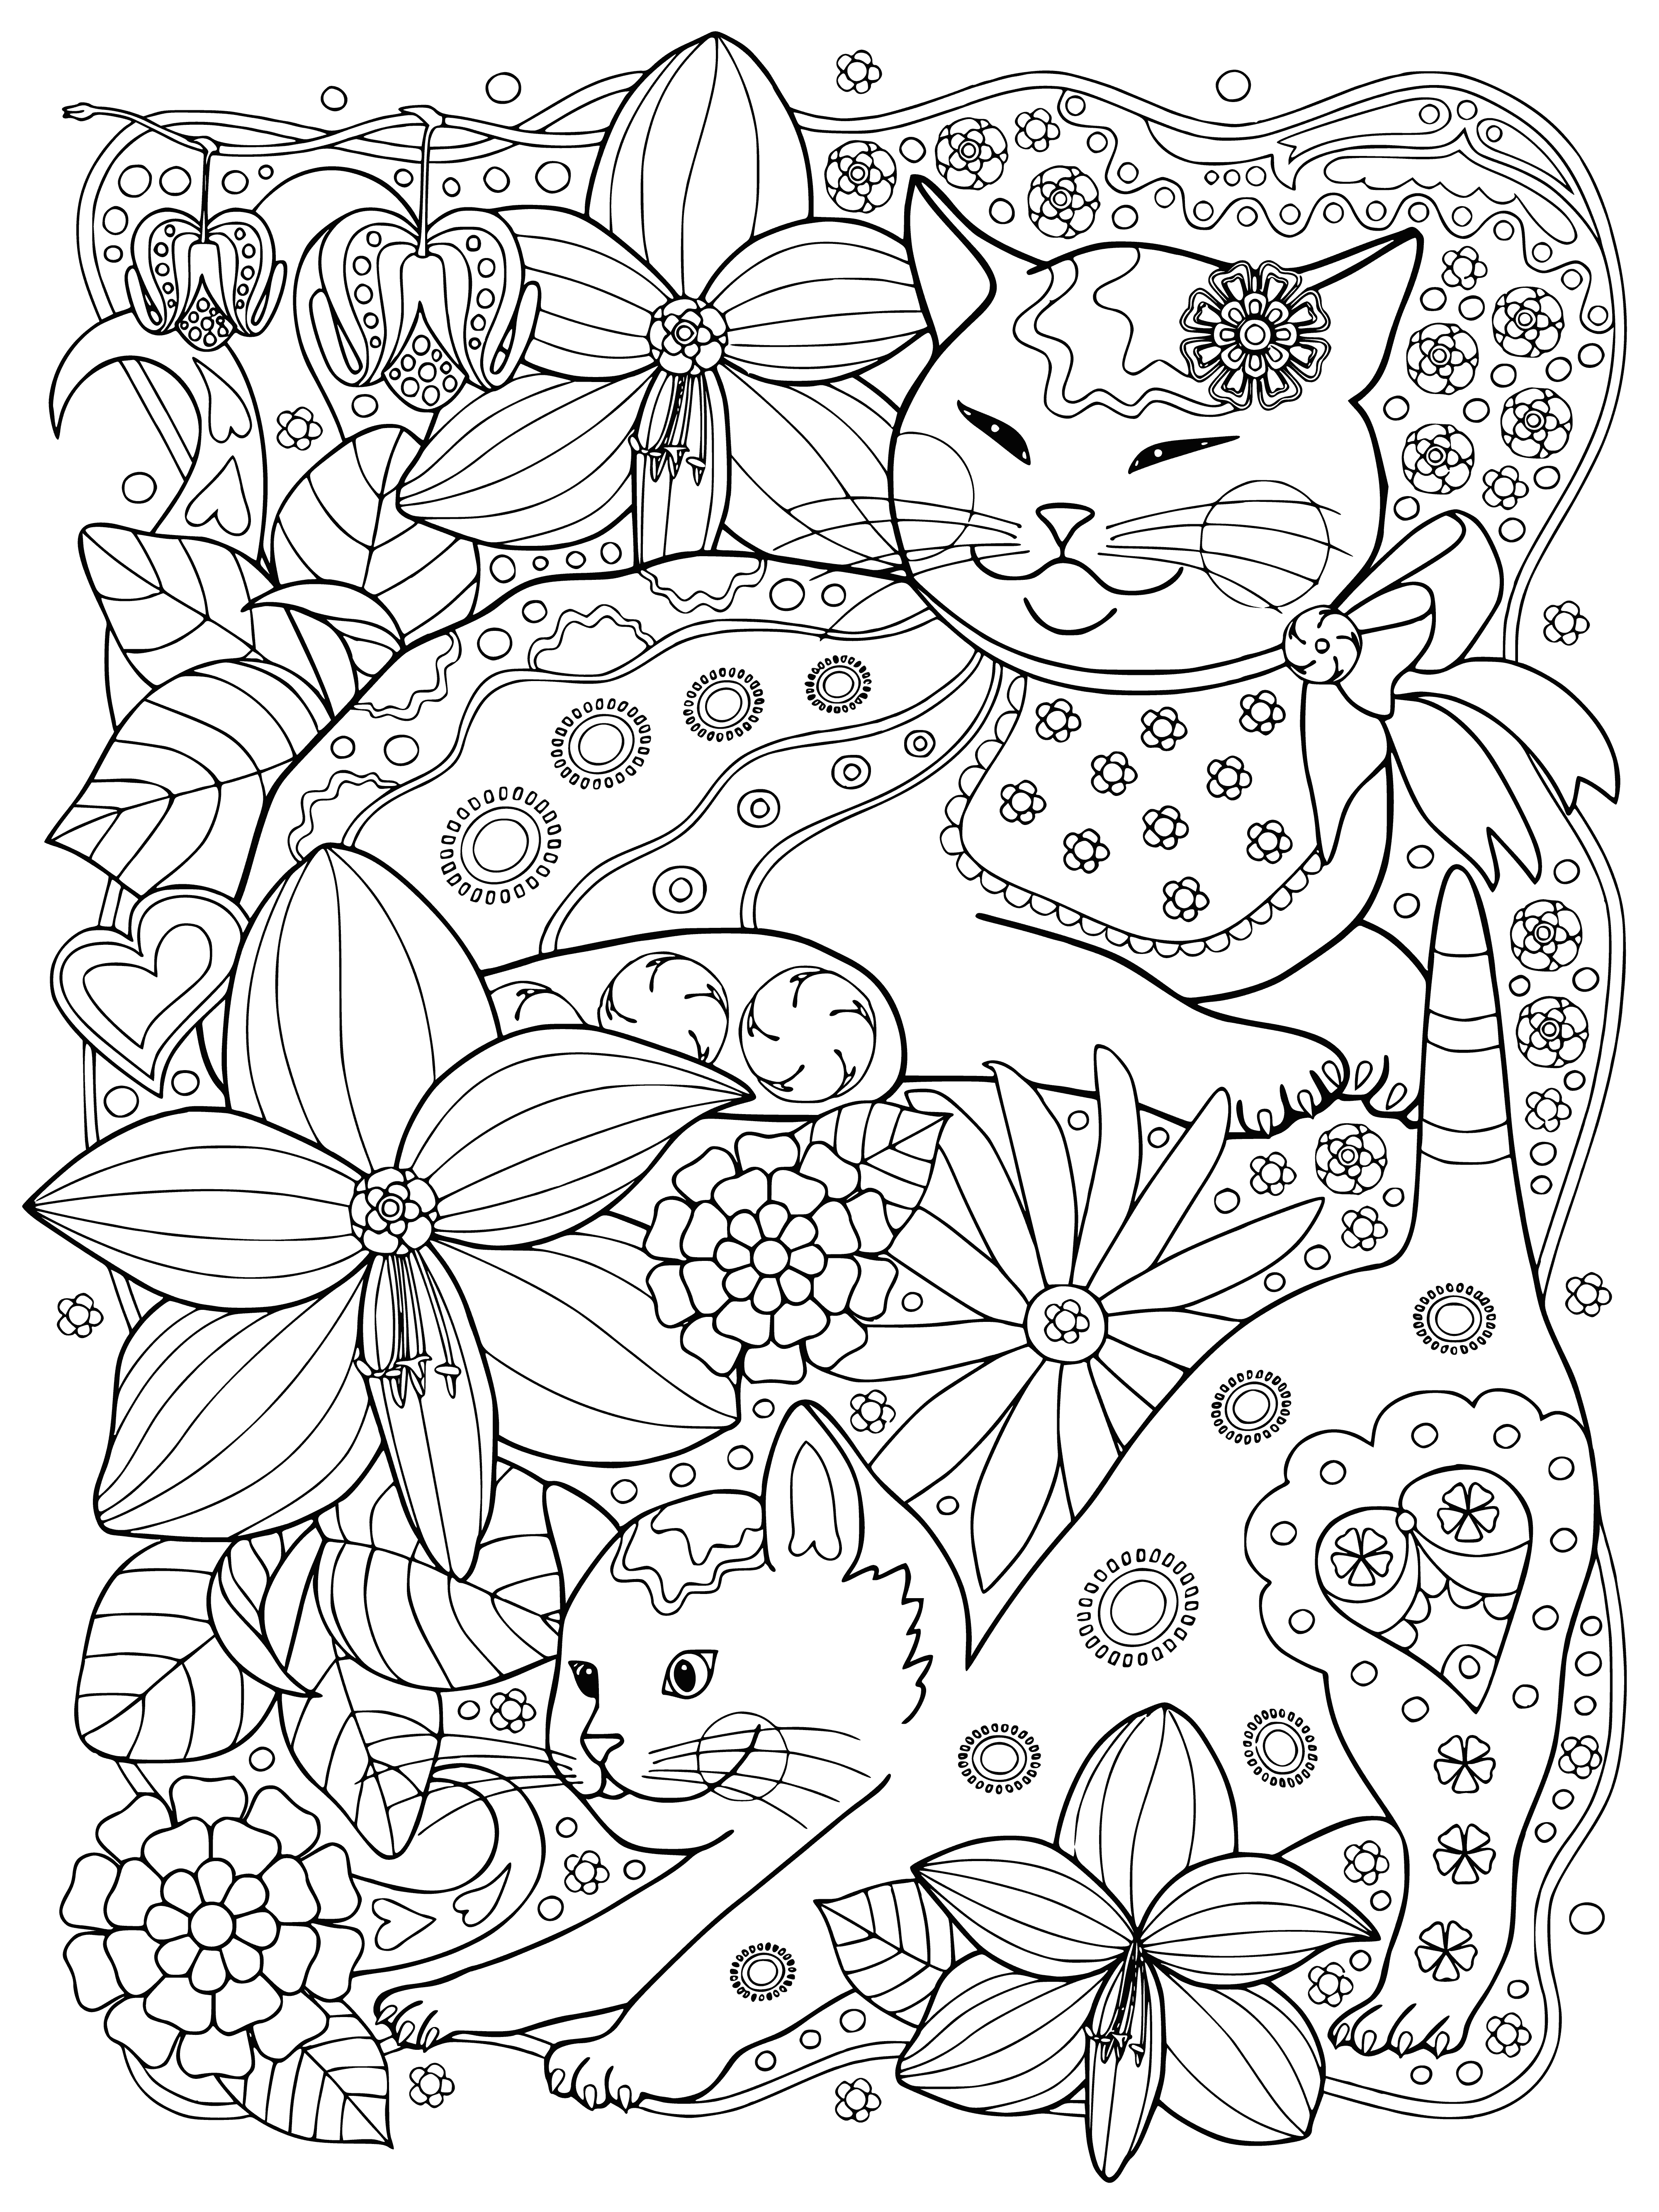 coloring page: Cats coloring pages w/flowers; some in mouth, some on head. #CatsLoveFlowers